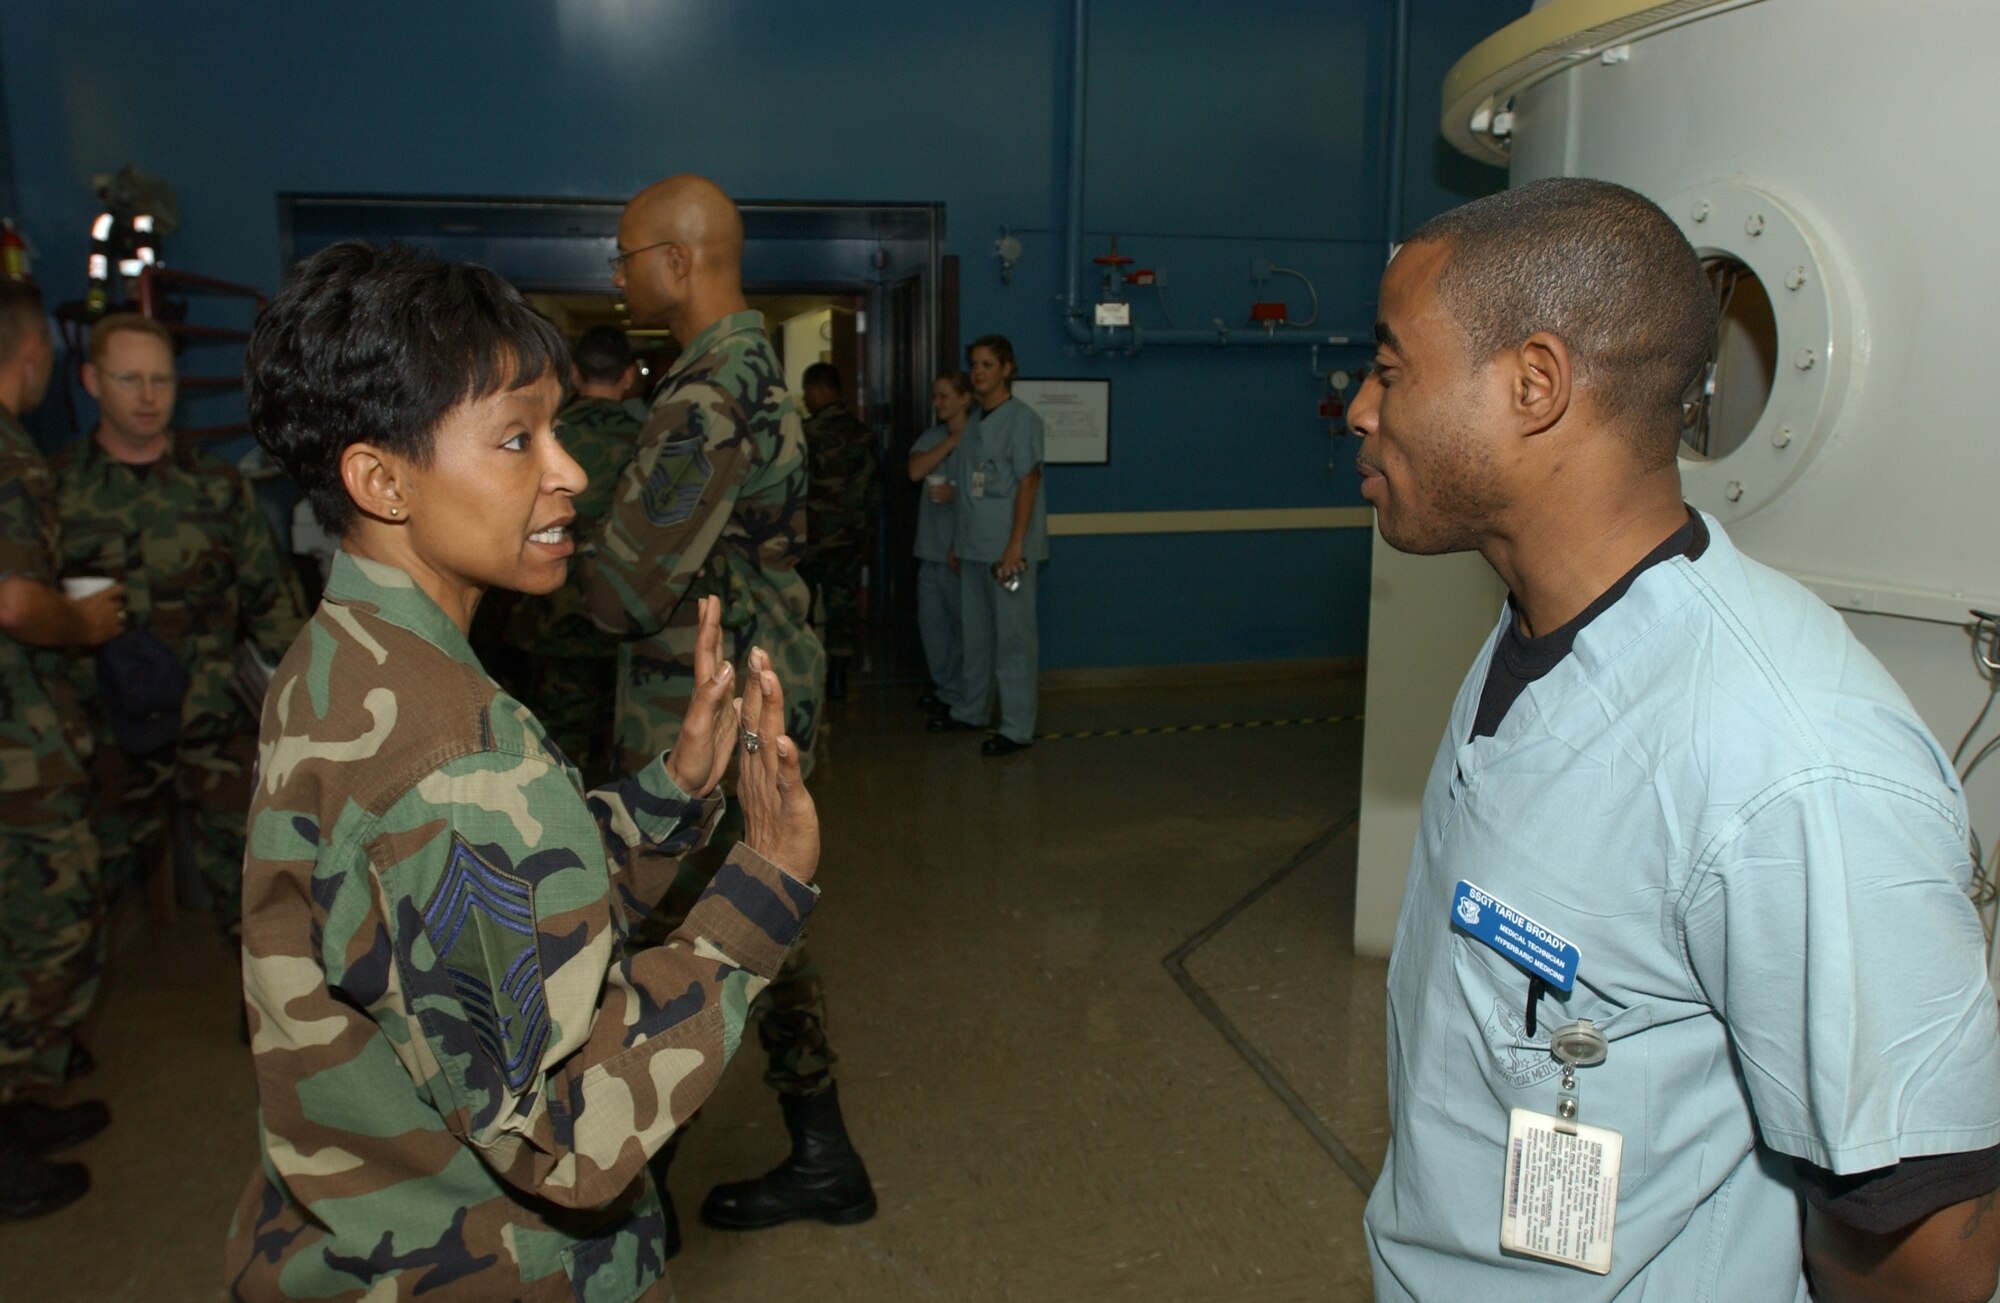 Chief Master Sgt. Carol Johnson, 60th Air Mobility Wing interim command chief, speaks to Staff Sgt. Tarue Broady, 60th Aerospace Medicine Squadron hyperbaric medicine medical technician. (U.S. Air Force photo/Andre Mansour)